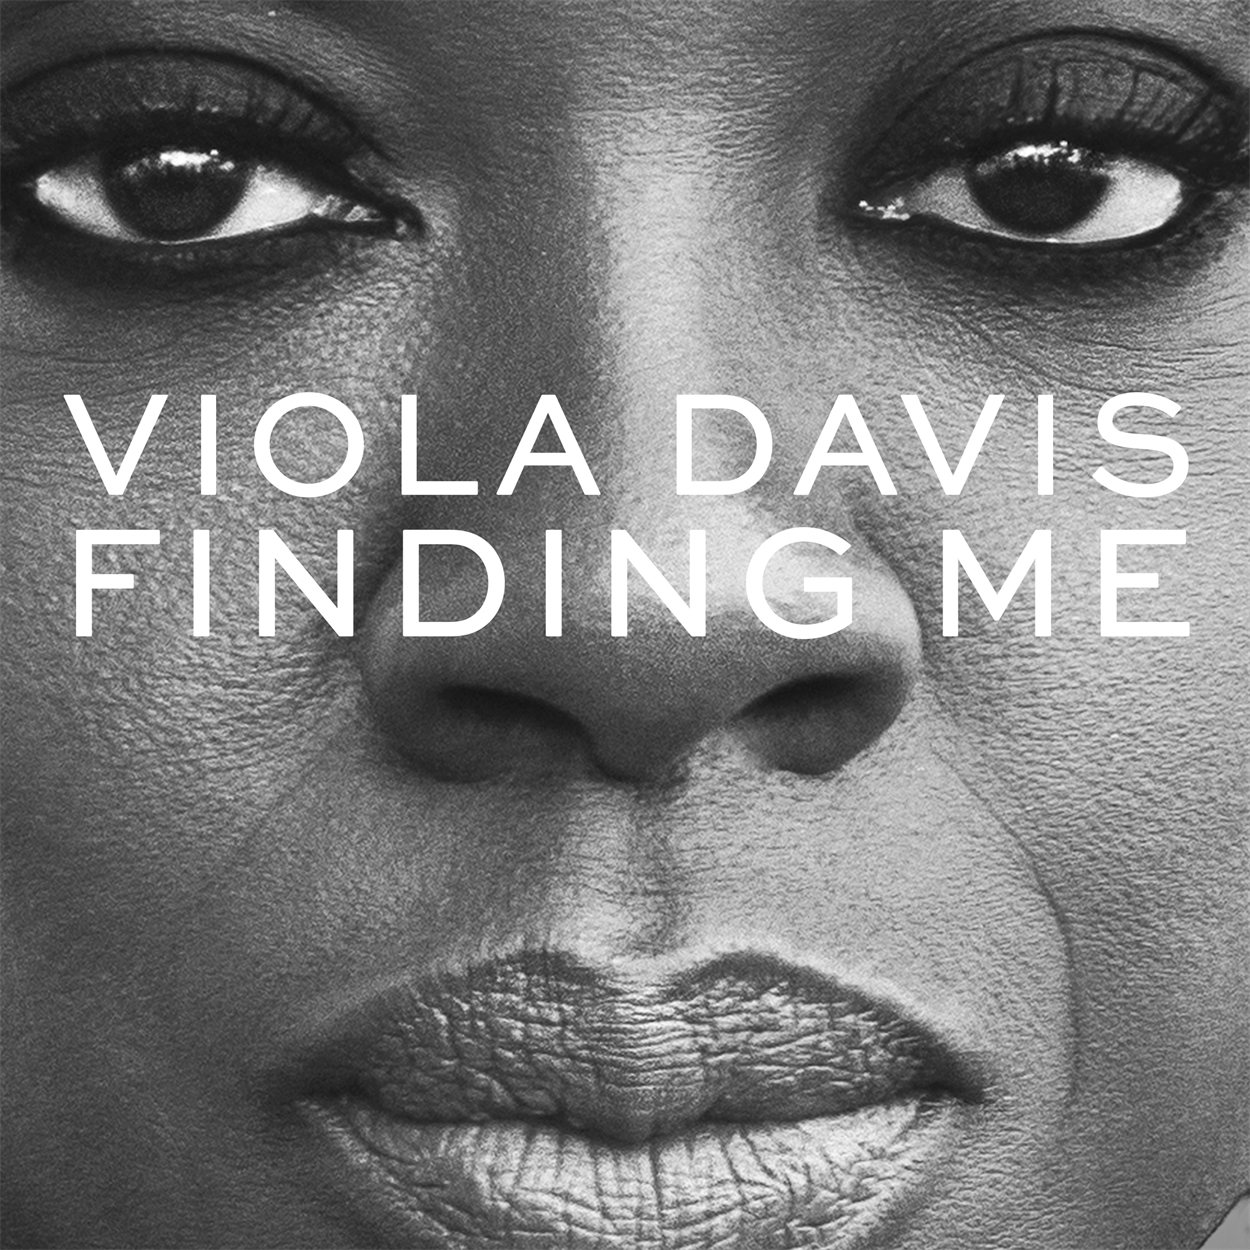 book review finding me by viola davis